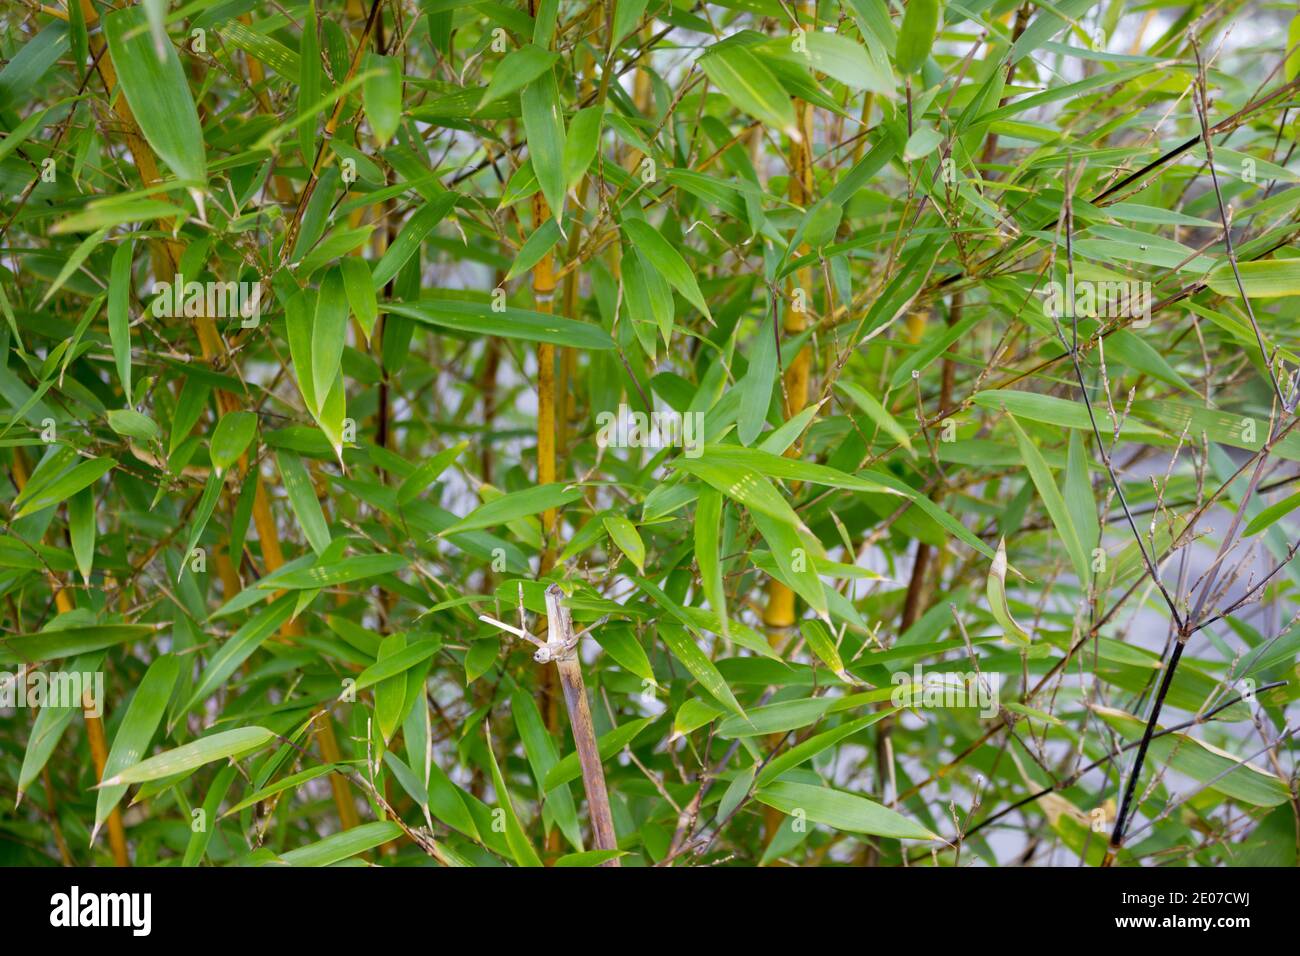 Green leaves and stems (culms) of Fargesia Bamboo vegetation Stock Photo